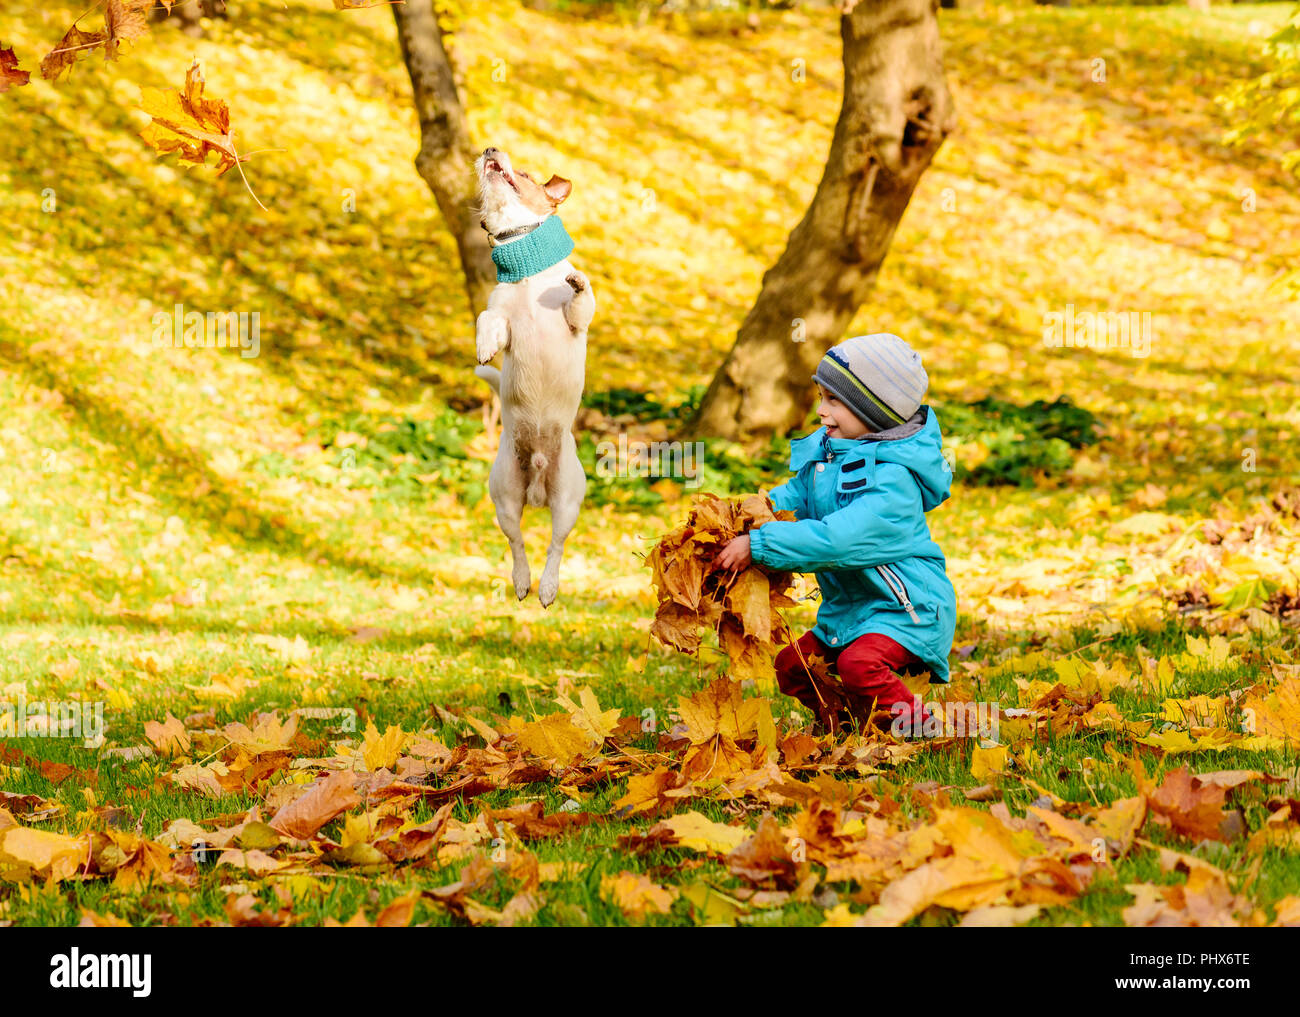 Kid boy enjoying game with his pet dog and autumn fallen leaves Stock Photo